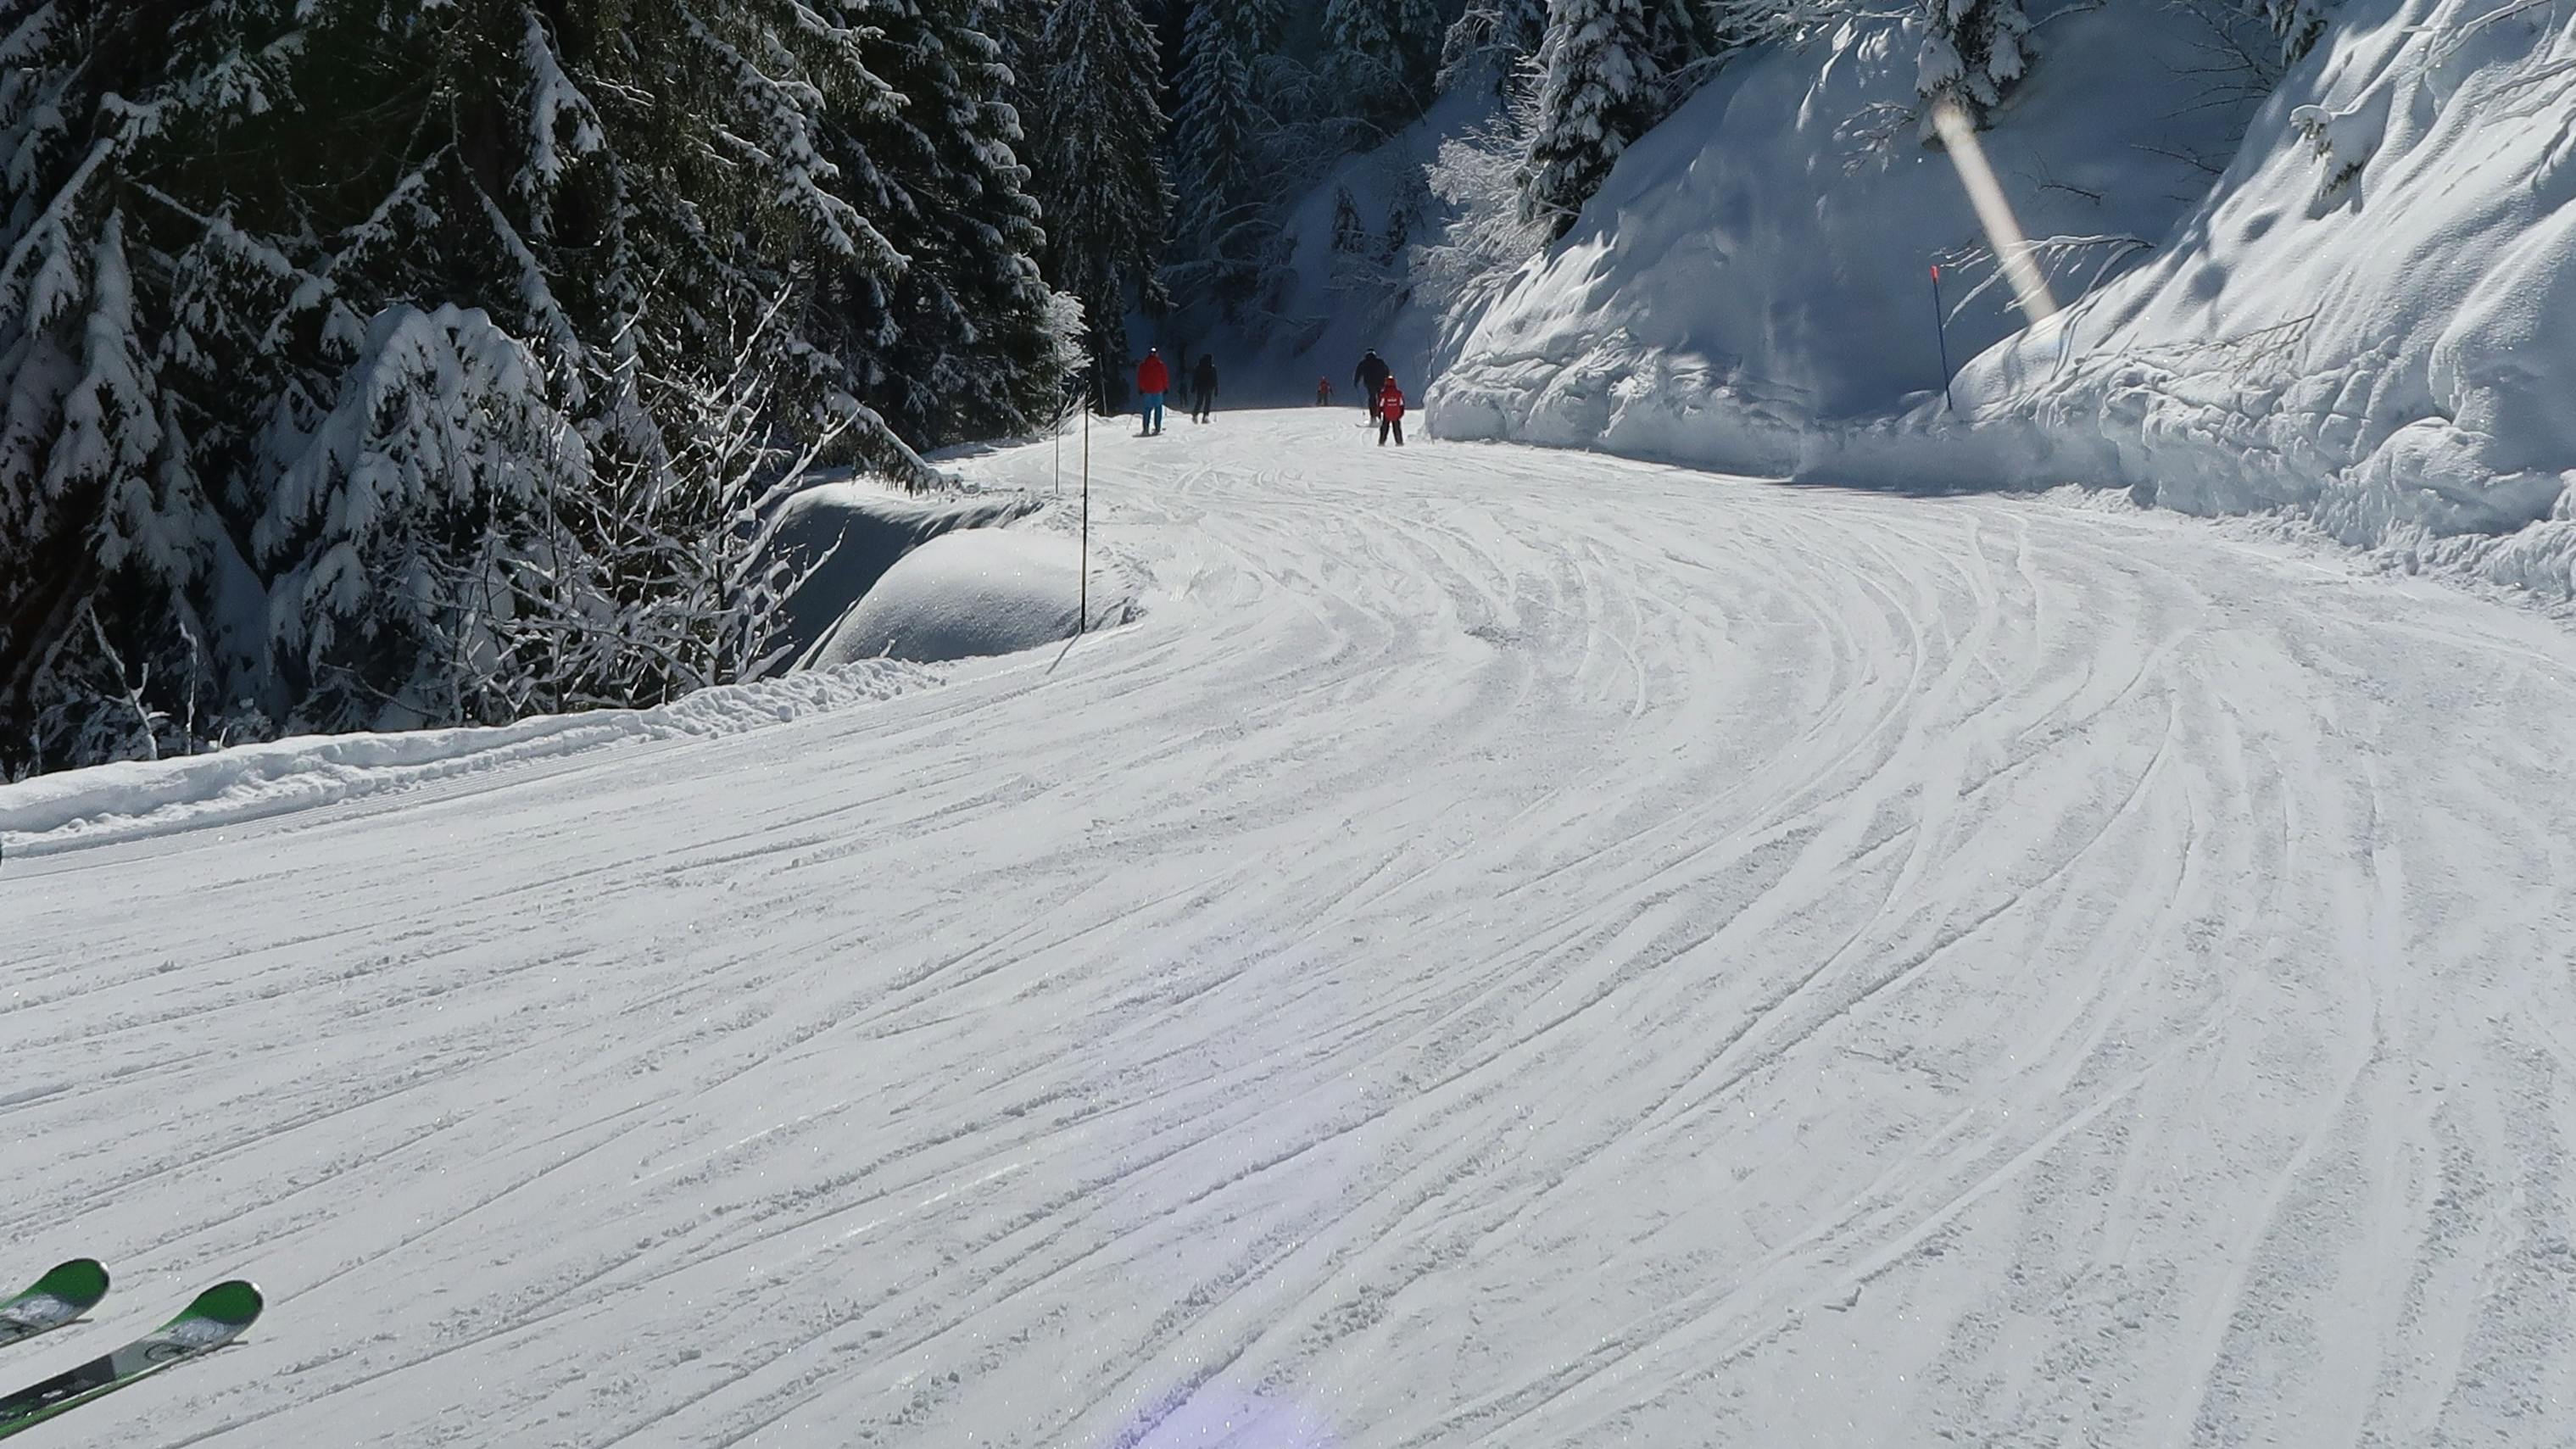 A skier on a groomed run wearing a backpack and helmet.